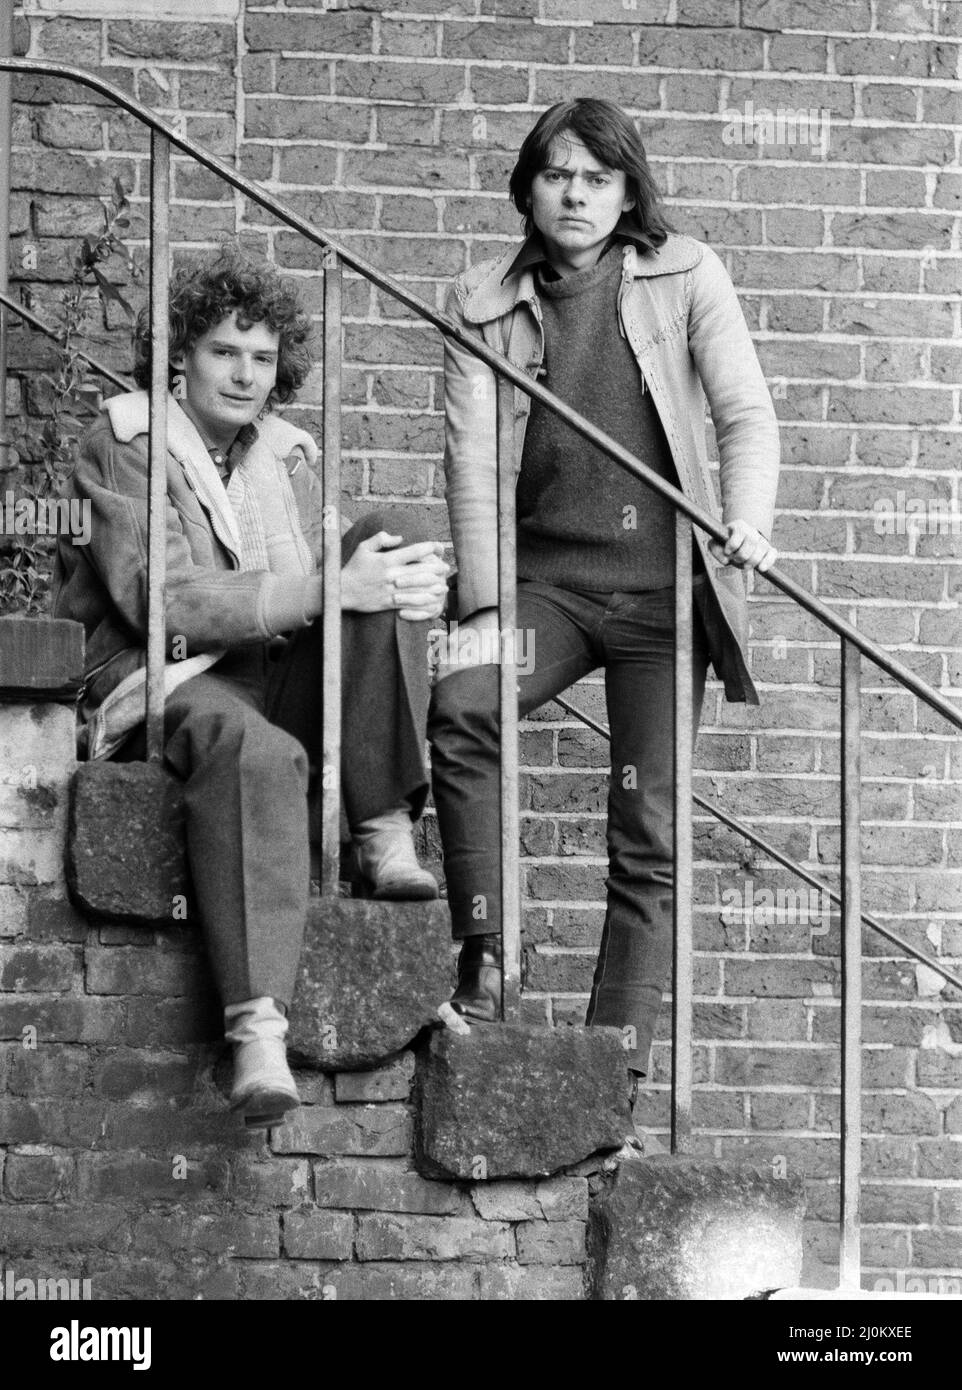 Jack Wild and Mark Lester, who were the stars of the 1968 musical film Oliver! 13th February 1981. Stock Photo